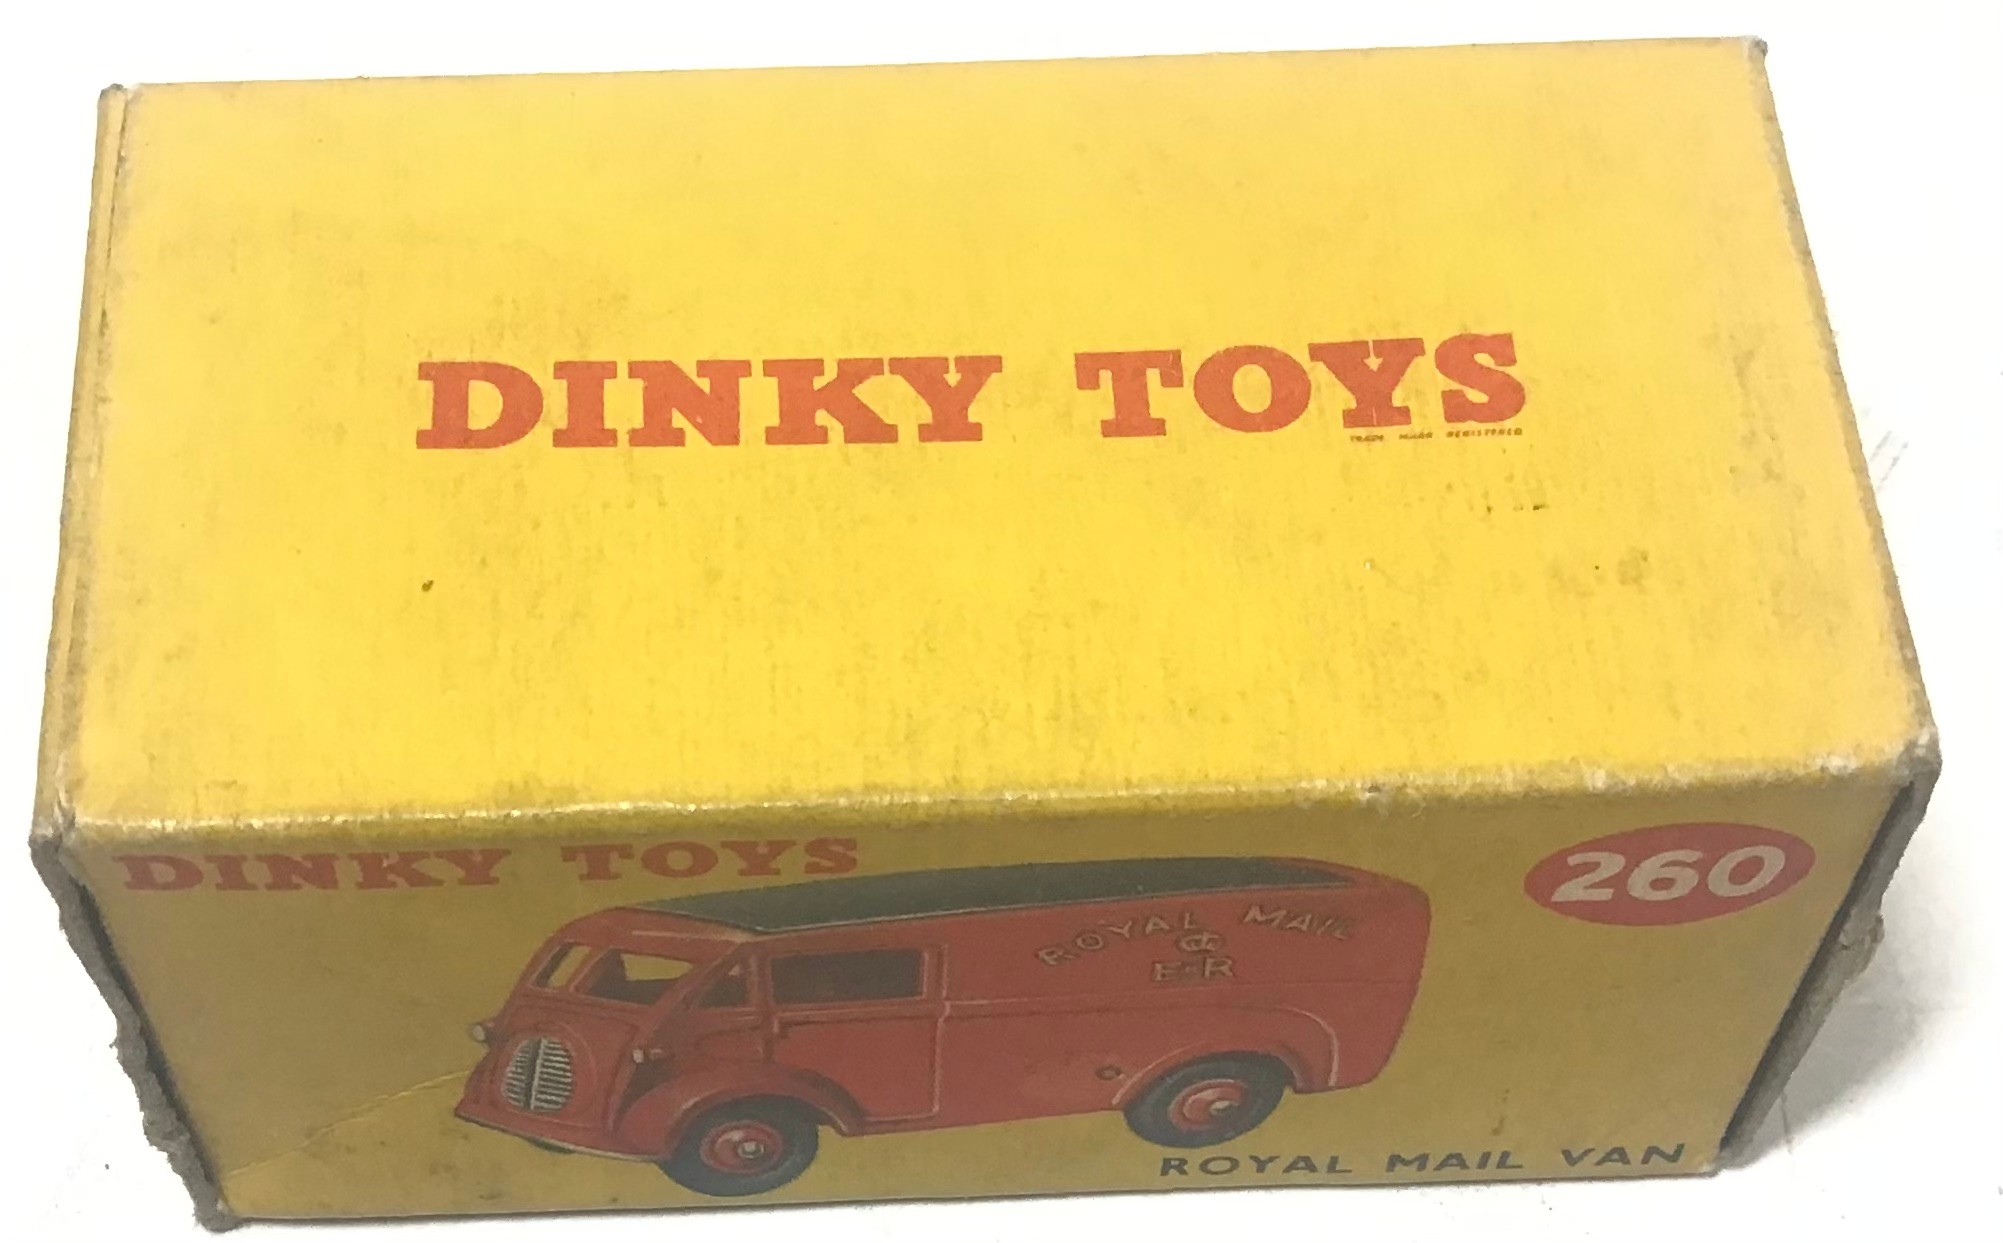 Dinky Toys 260 Royal Mail Van Boxed. Please see pics for condition. - Image 6 of 6